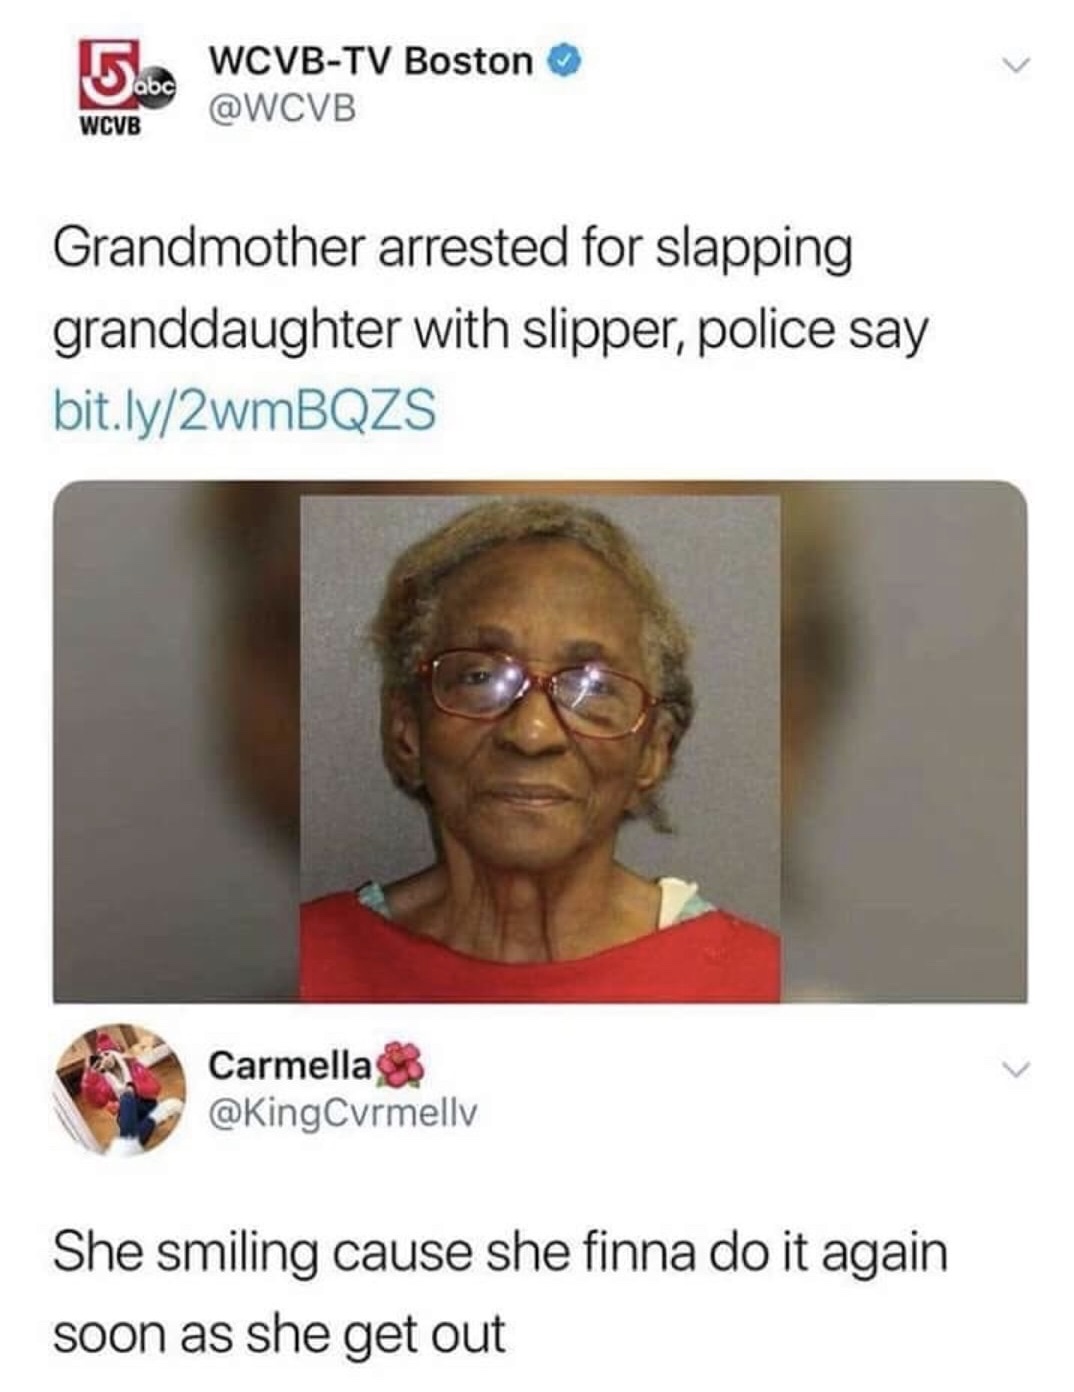 memes - meme wanna fuck - abc WcvbTv Boston Wcvb Grandmother arrested for slapping granddaughter with slipper, police say bit.ly2wmBQZS Carmella She smiling cause she finna do it again soon as she get out